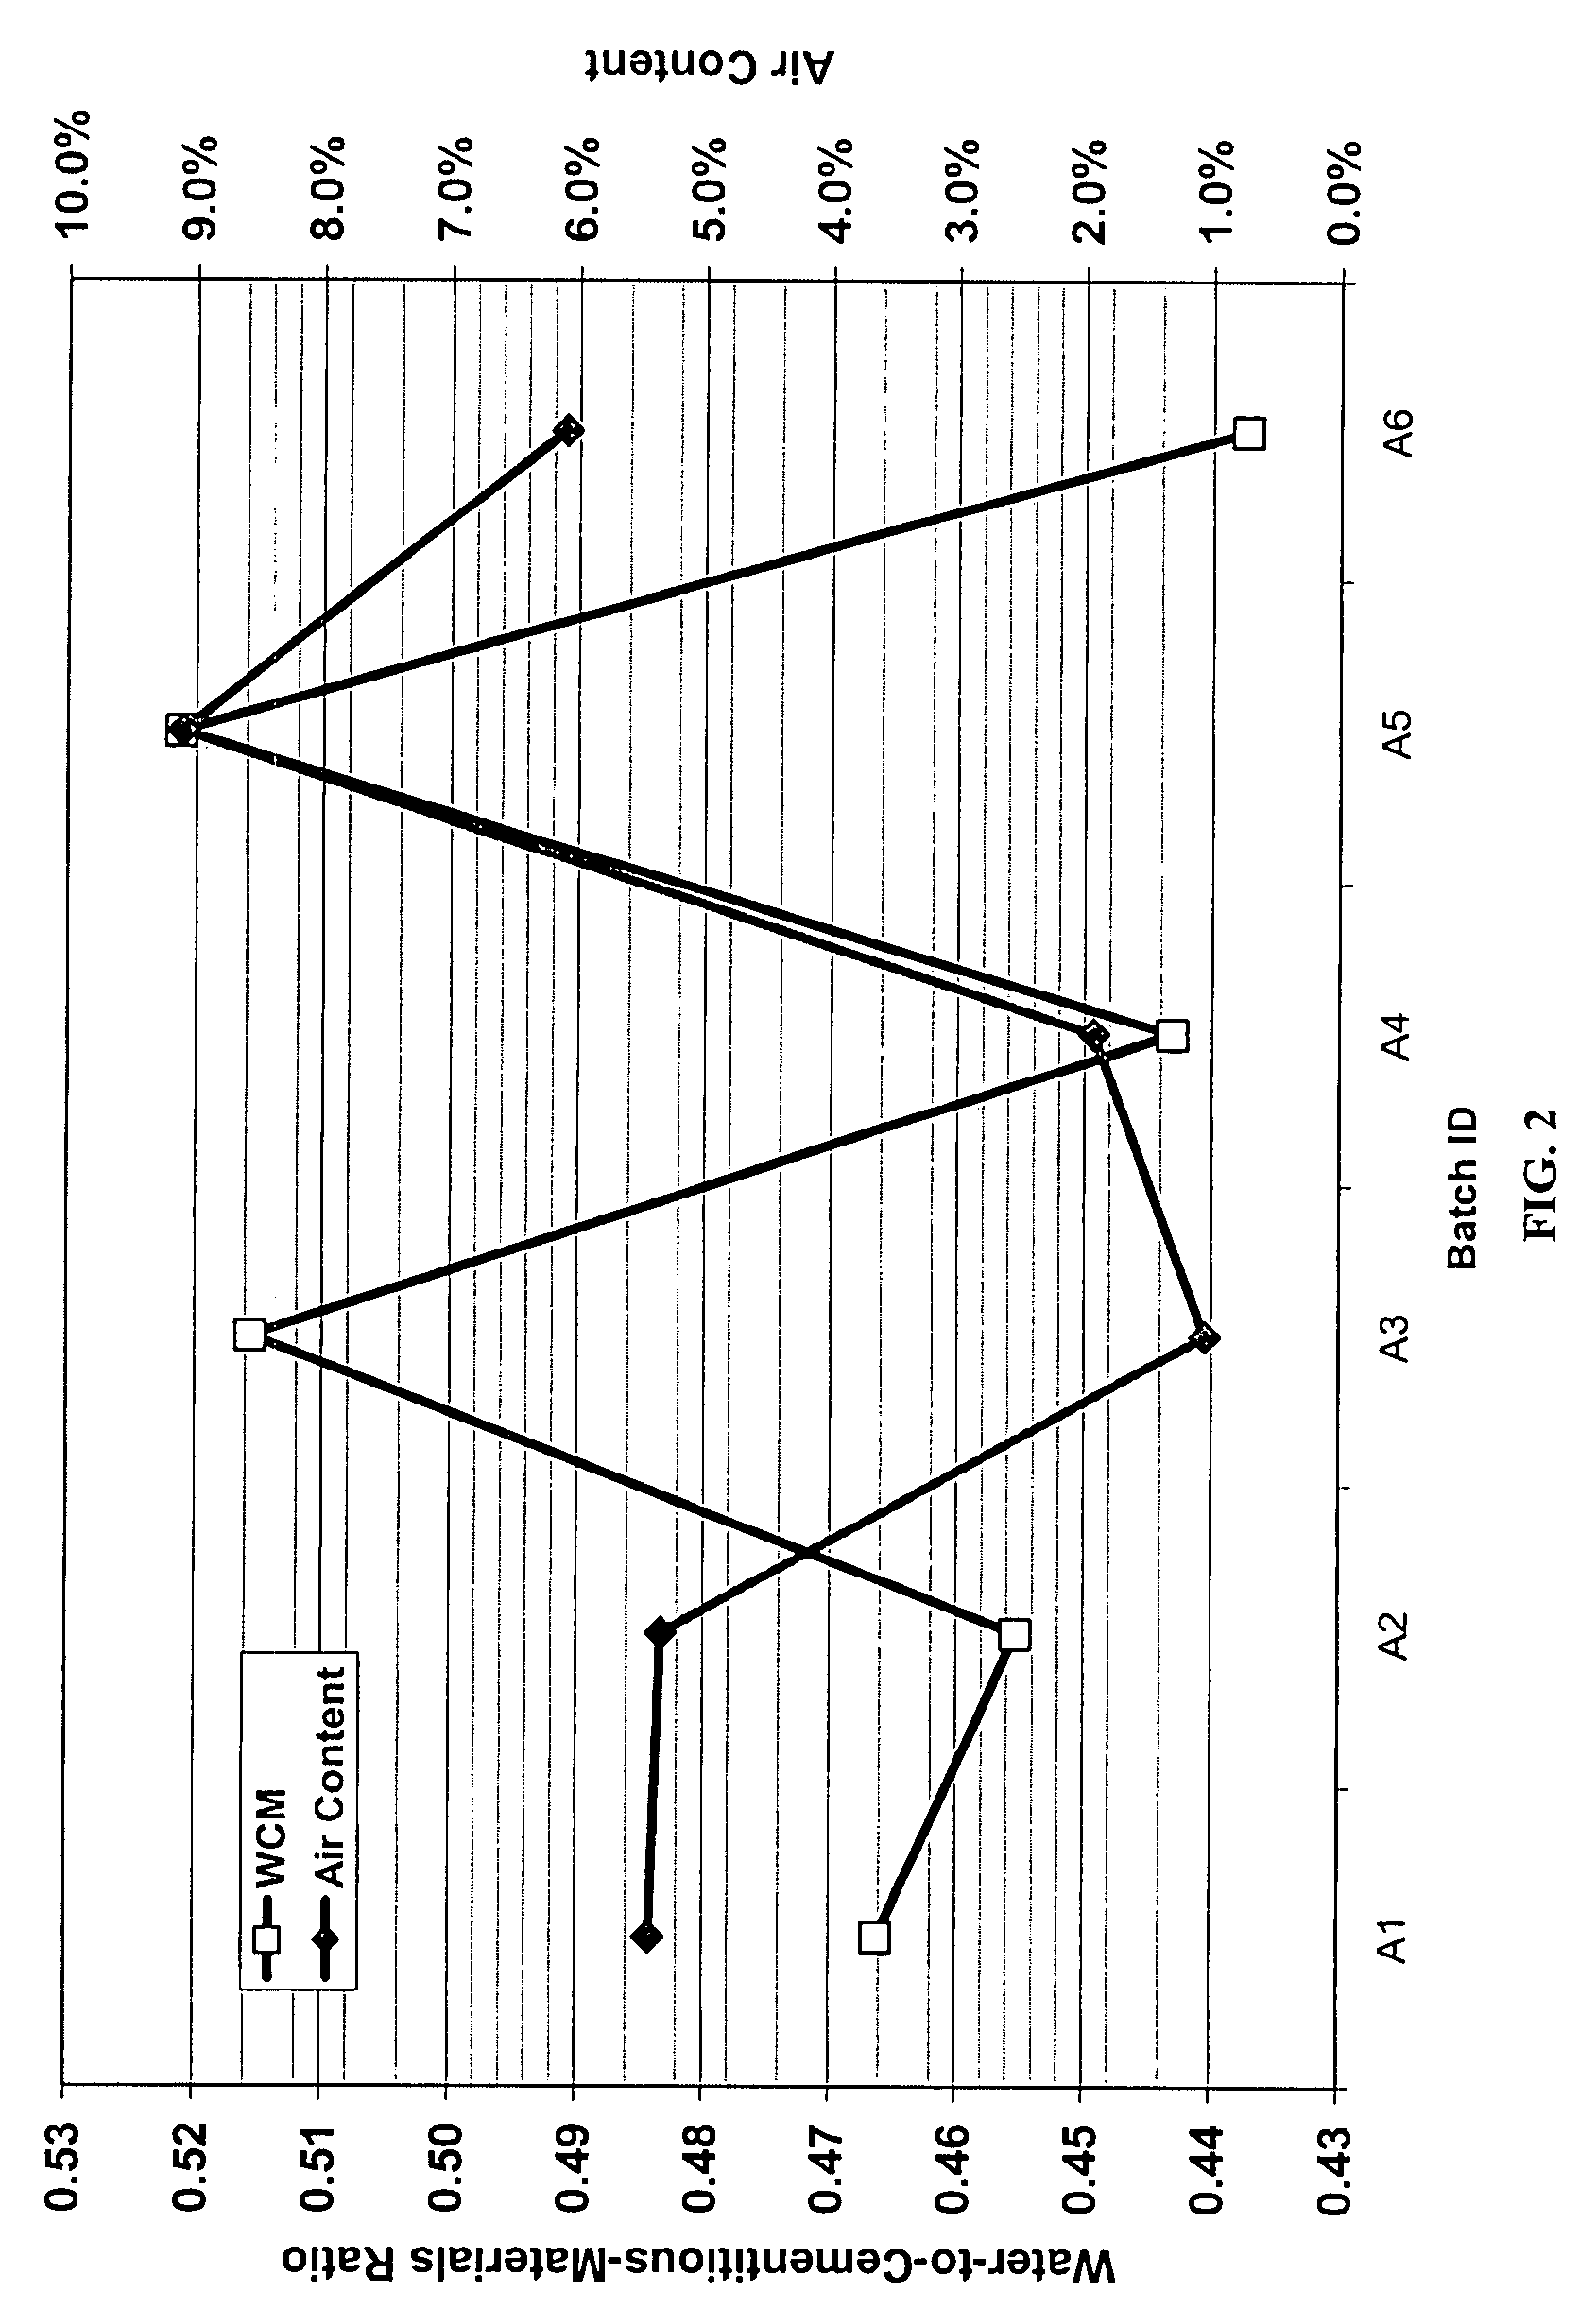 Method and system for concrete quality control based on the concrete's maturity